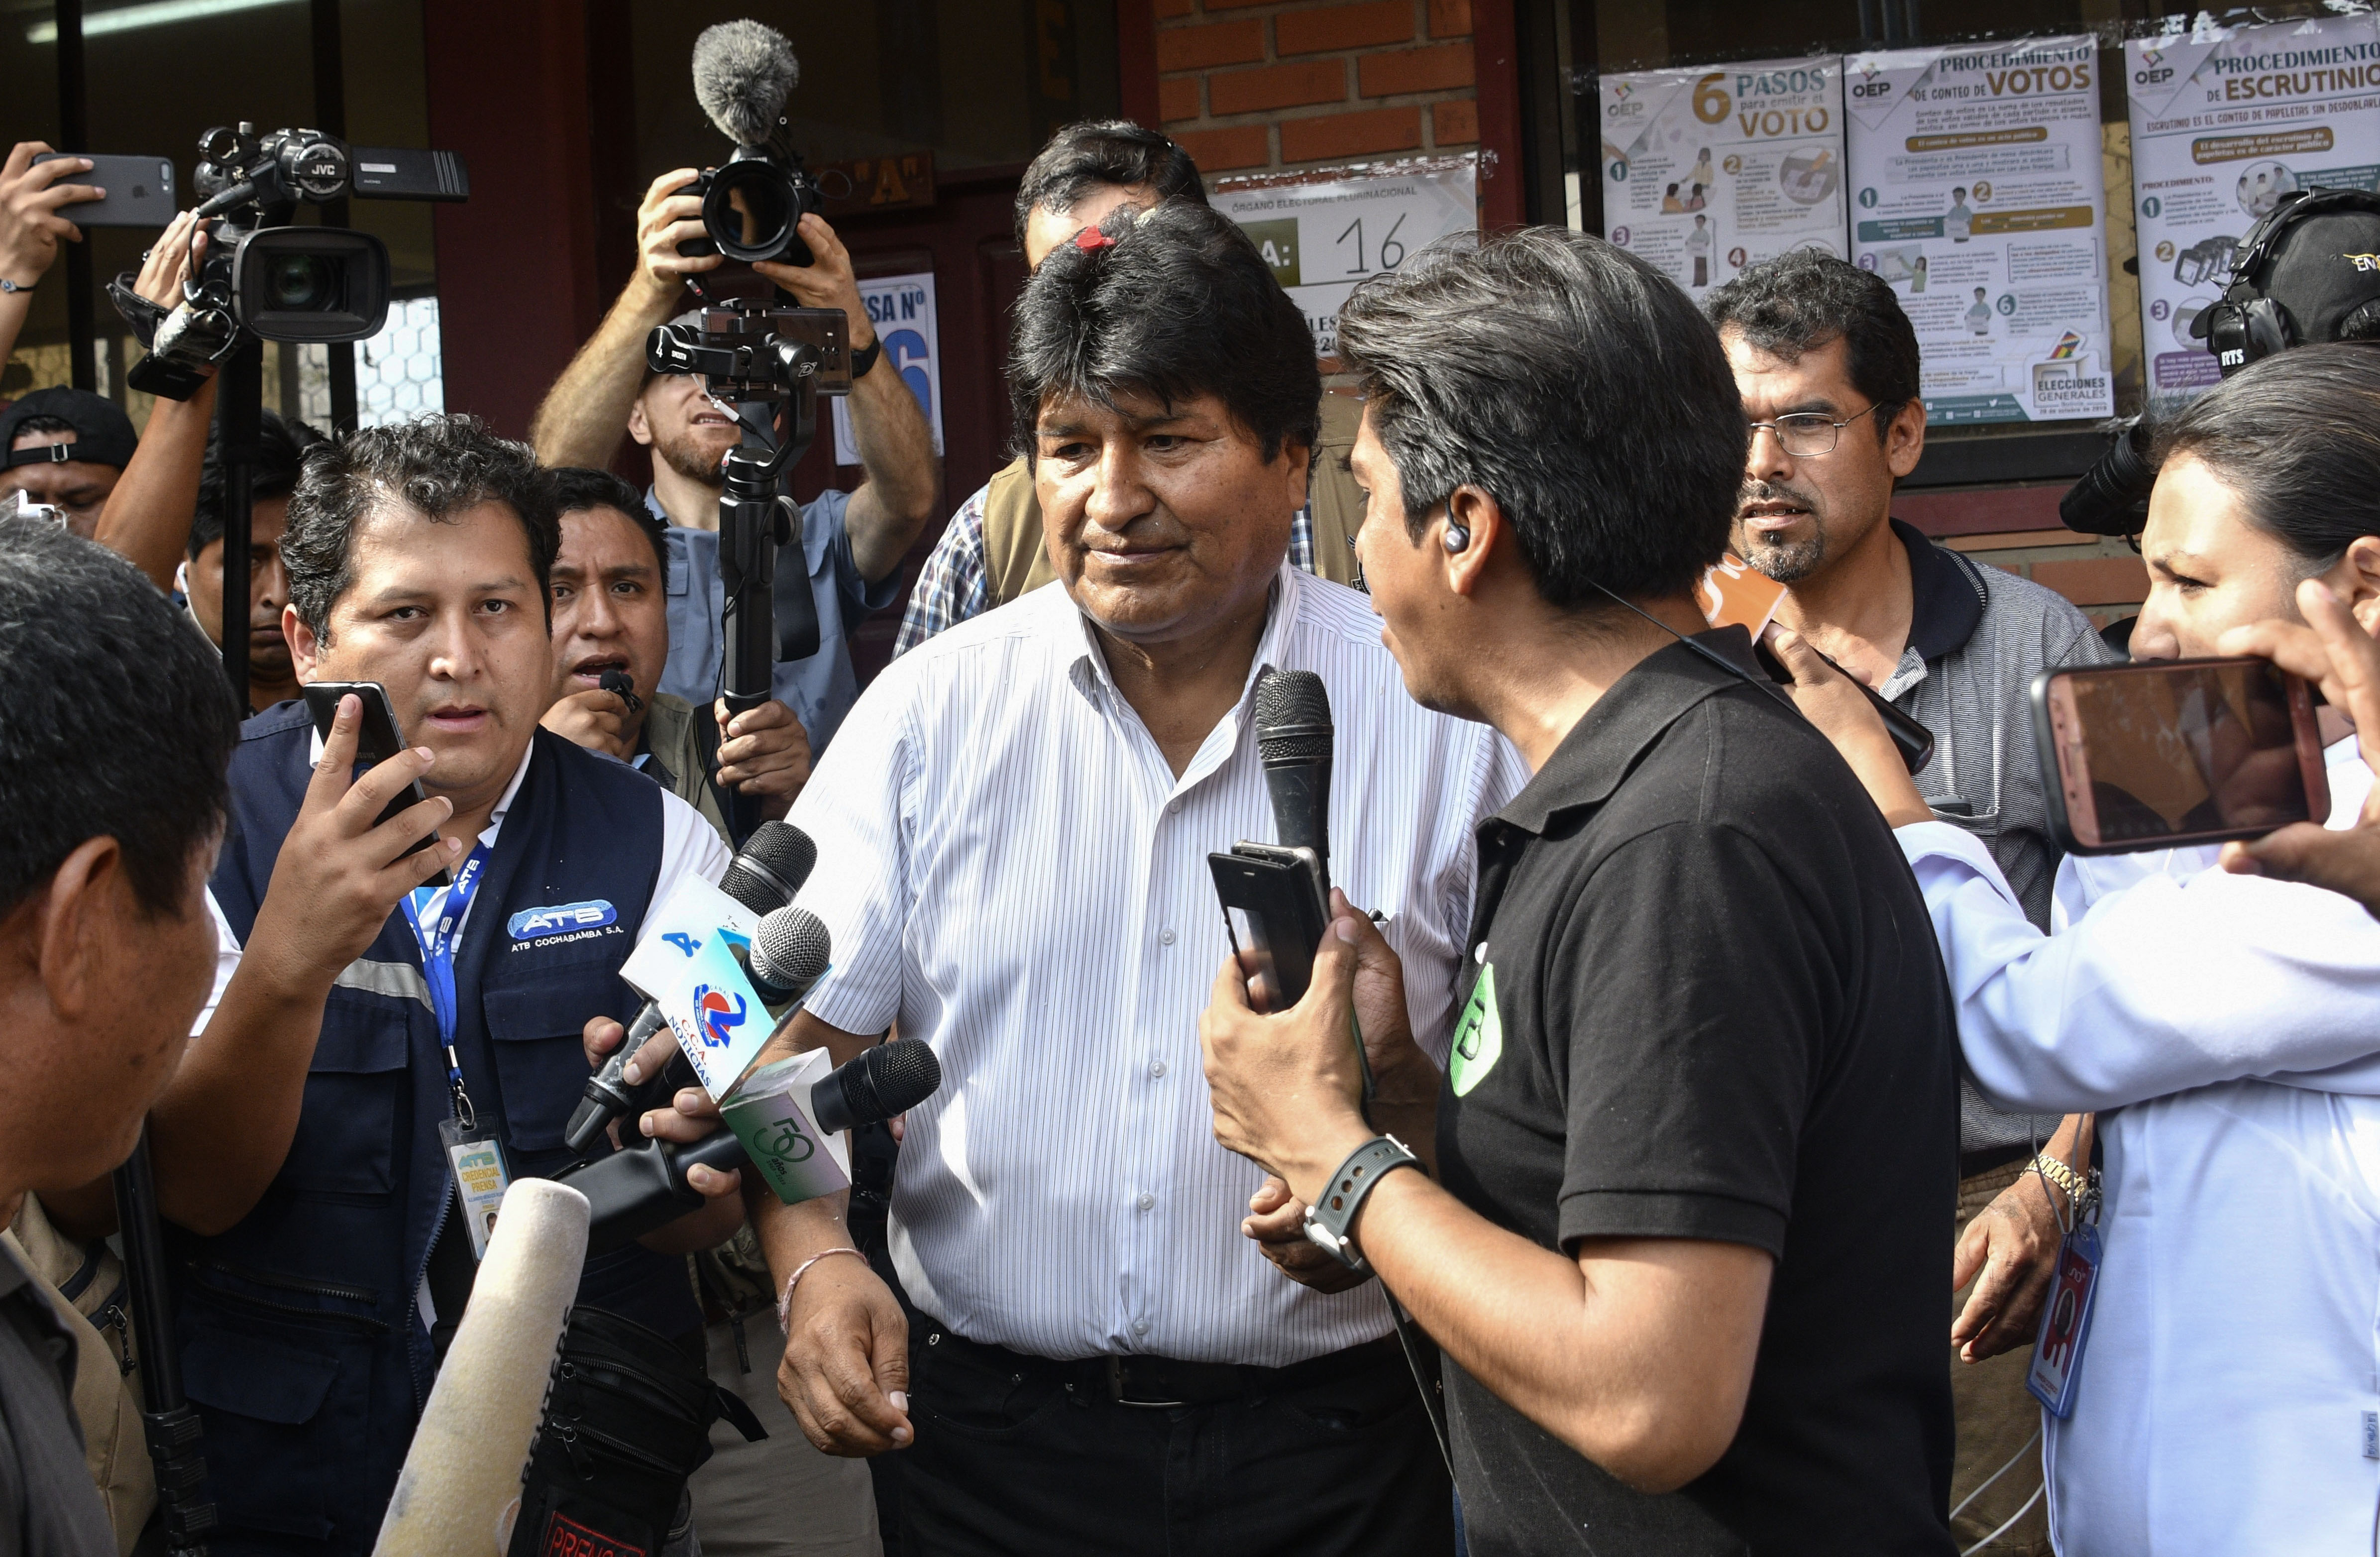 Bolivia's President and presidential candidate Evo Morales talks to the press after casting his vote during presidential elections in Villa 14 de Septiembre, Chapare, Cochabamba department, Bolivia on October 20, 2019. - Polls opened in Bolivia Sunday with Evo Morales vying for a controversial fourth term as the country's first indigenous president amid allegations of corruption and authoritarianism. (Photo by AIZAR RALDES / AFP) (Photo by AIZAR RALDES/AFP via Getty Images)